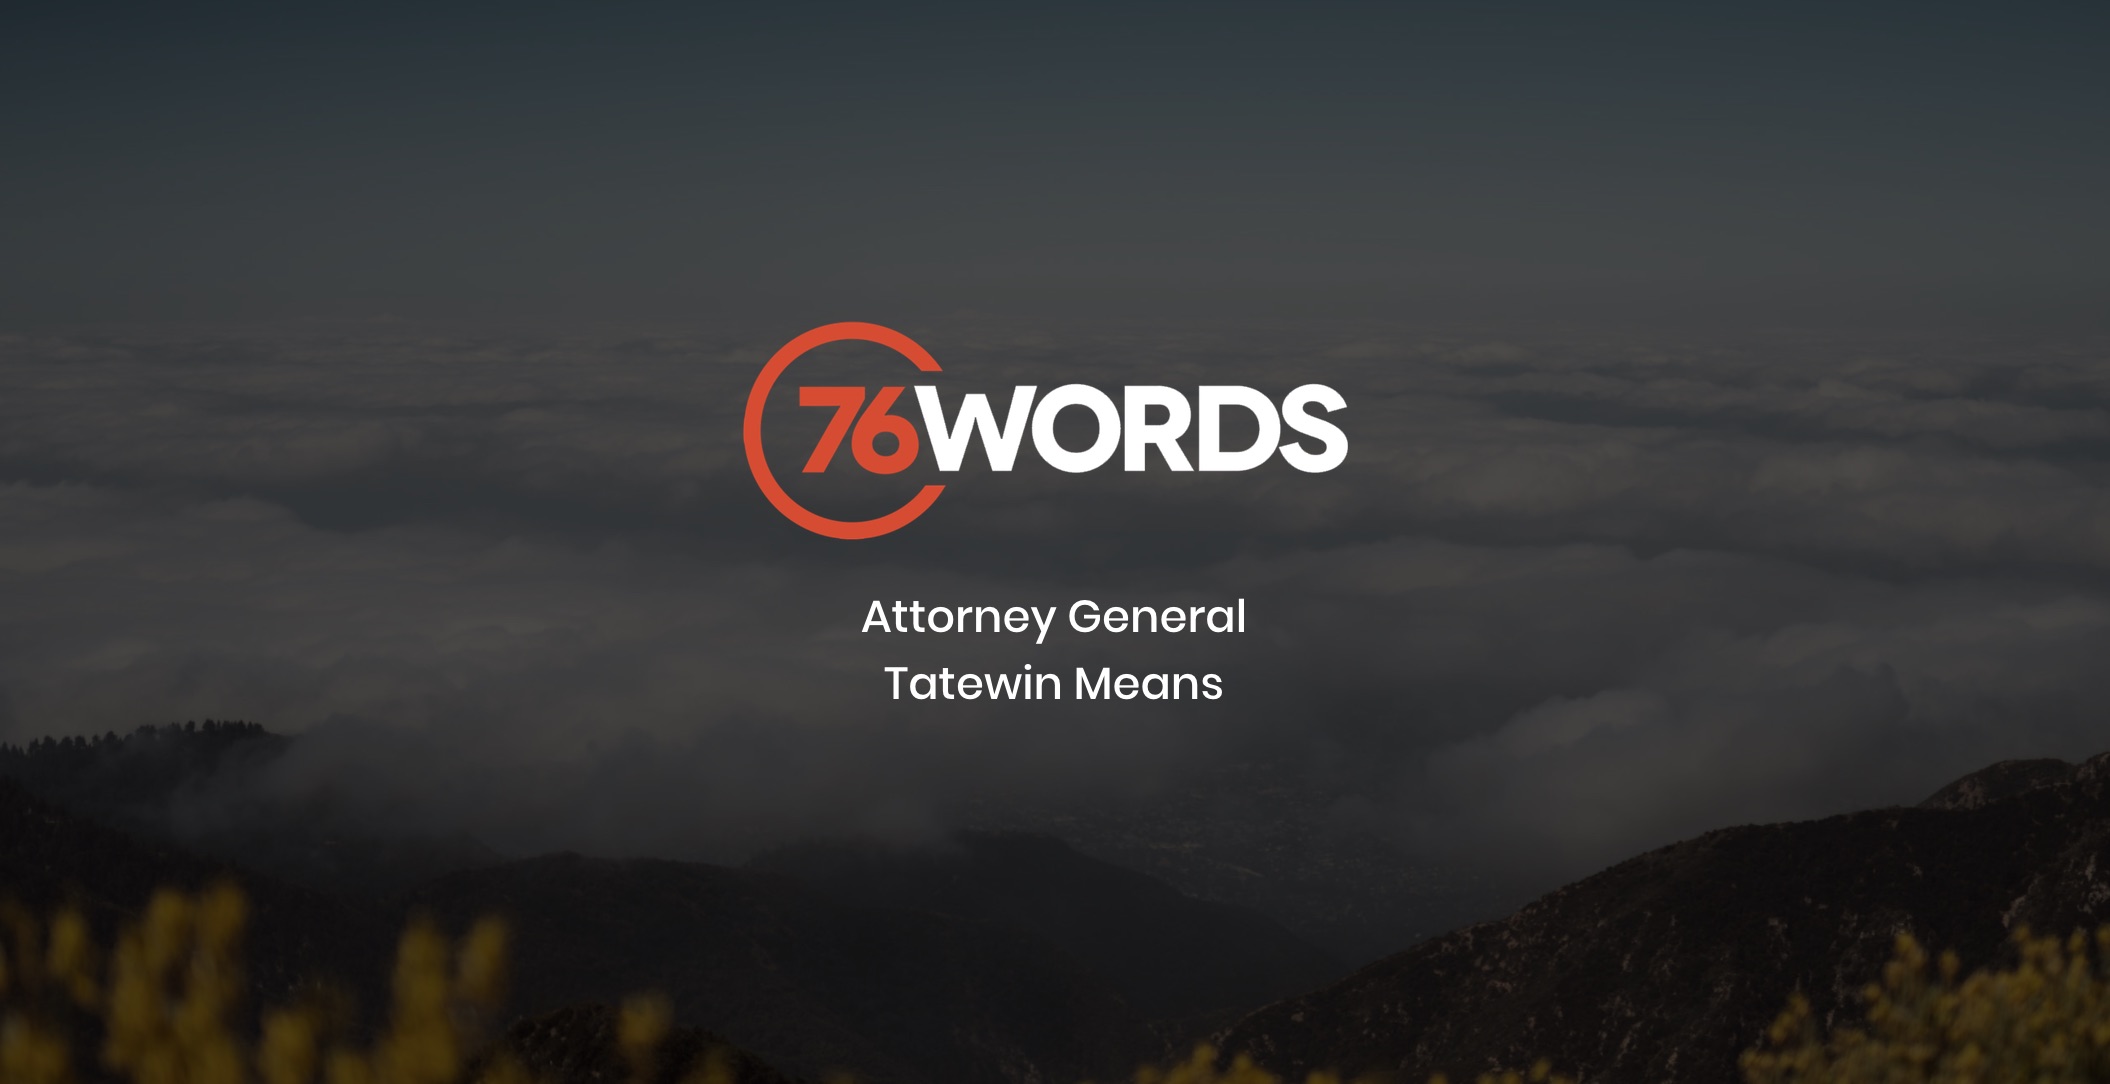 White and orange 76 Words Attorney General Tatewin Means logo with dimmed background showing a valley and clouds